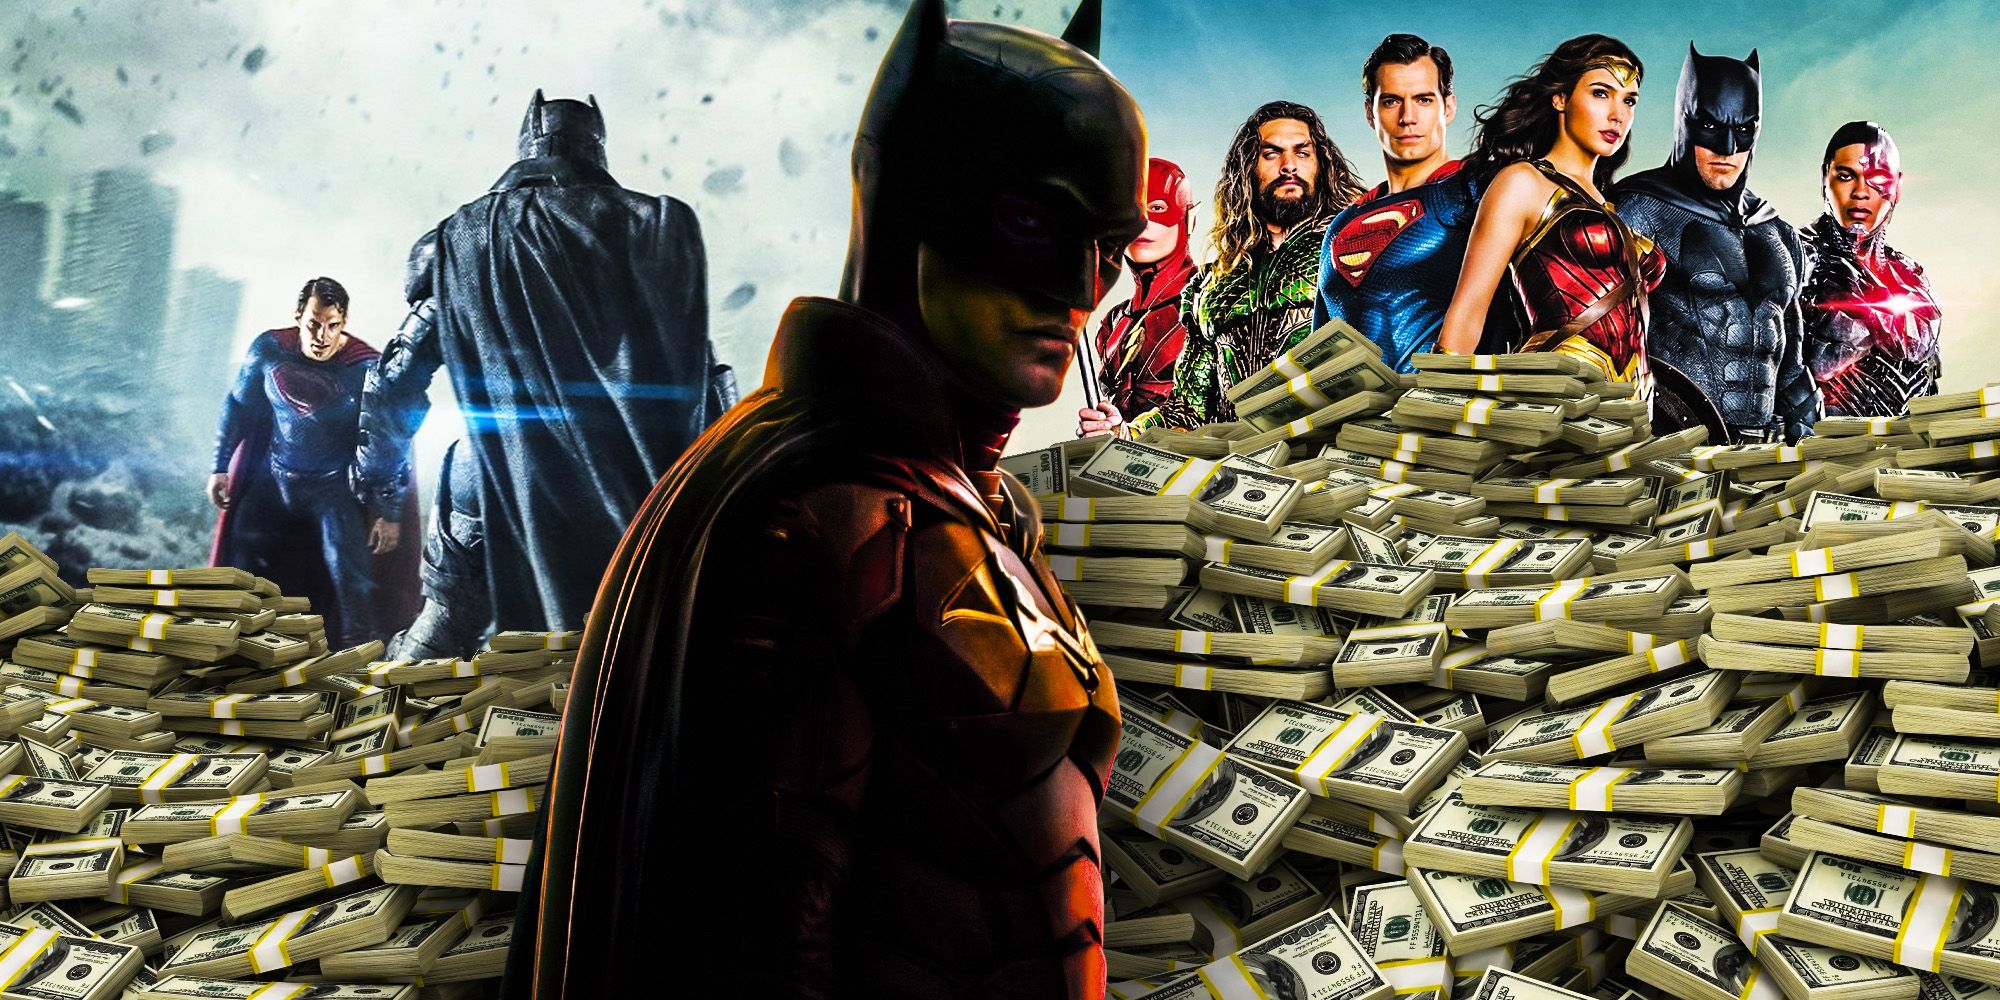 The Batman Box Office Proves WB's Worst BvS and Justice League Mistakes